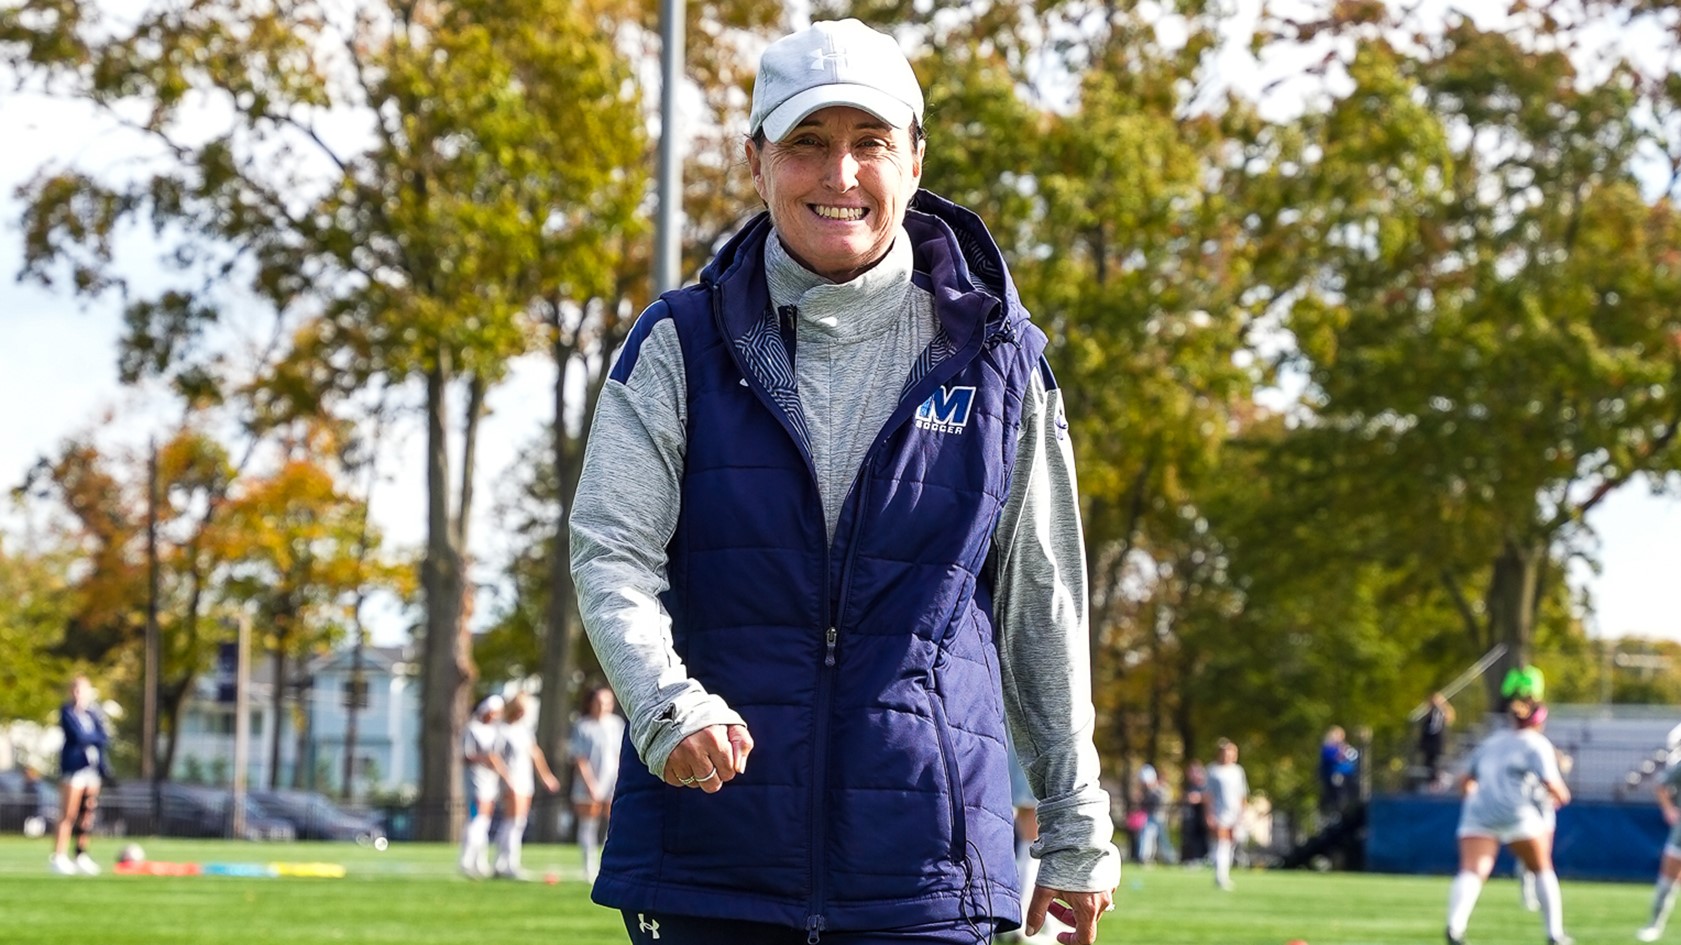 Turner on the field during her time at Monmouth.